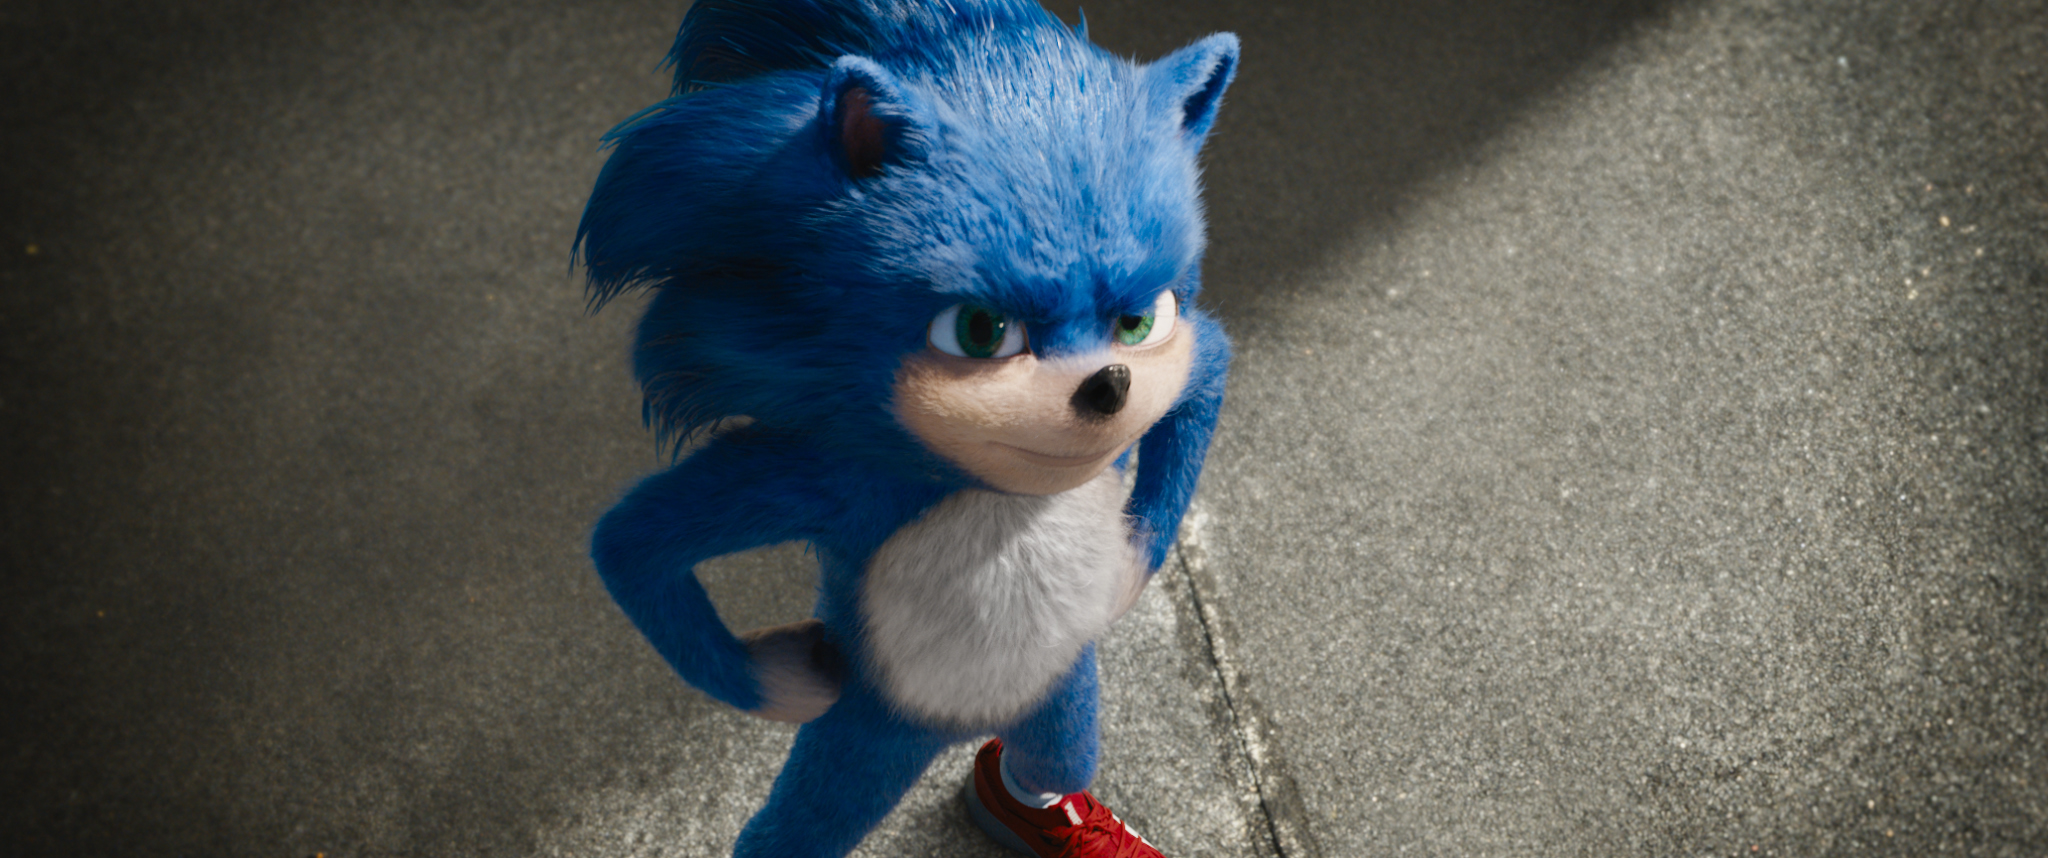 SONIC THE HEDGEHOG Director Confirms The Character Is Getting A Major ...